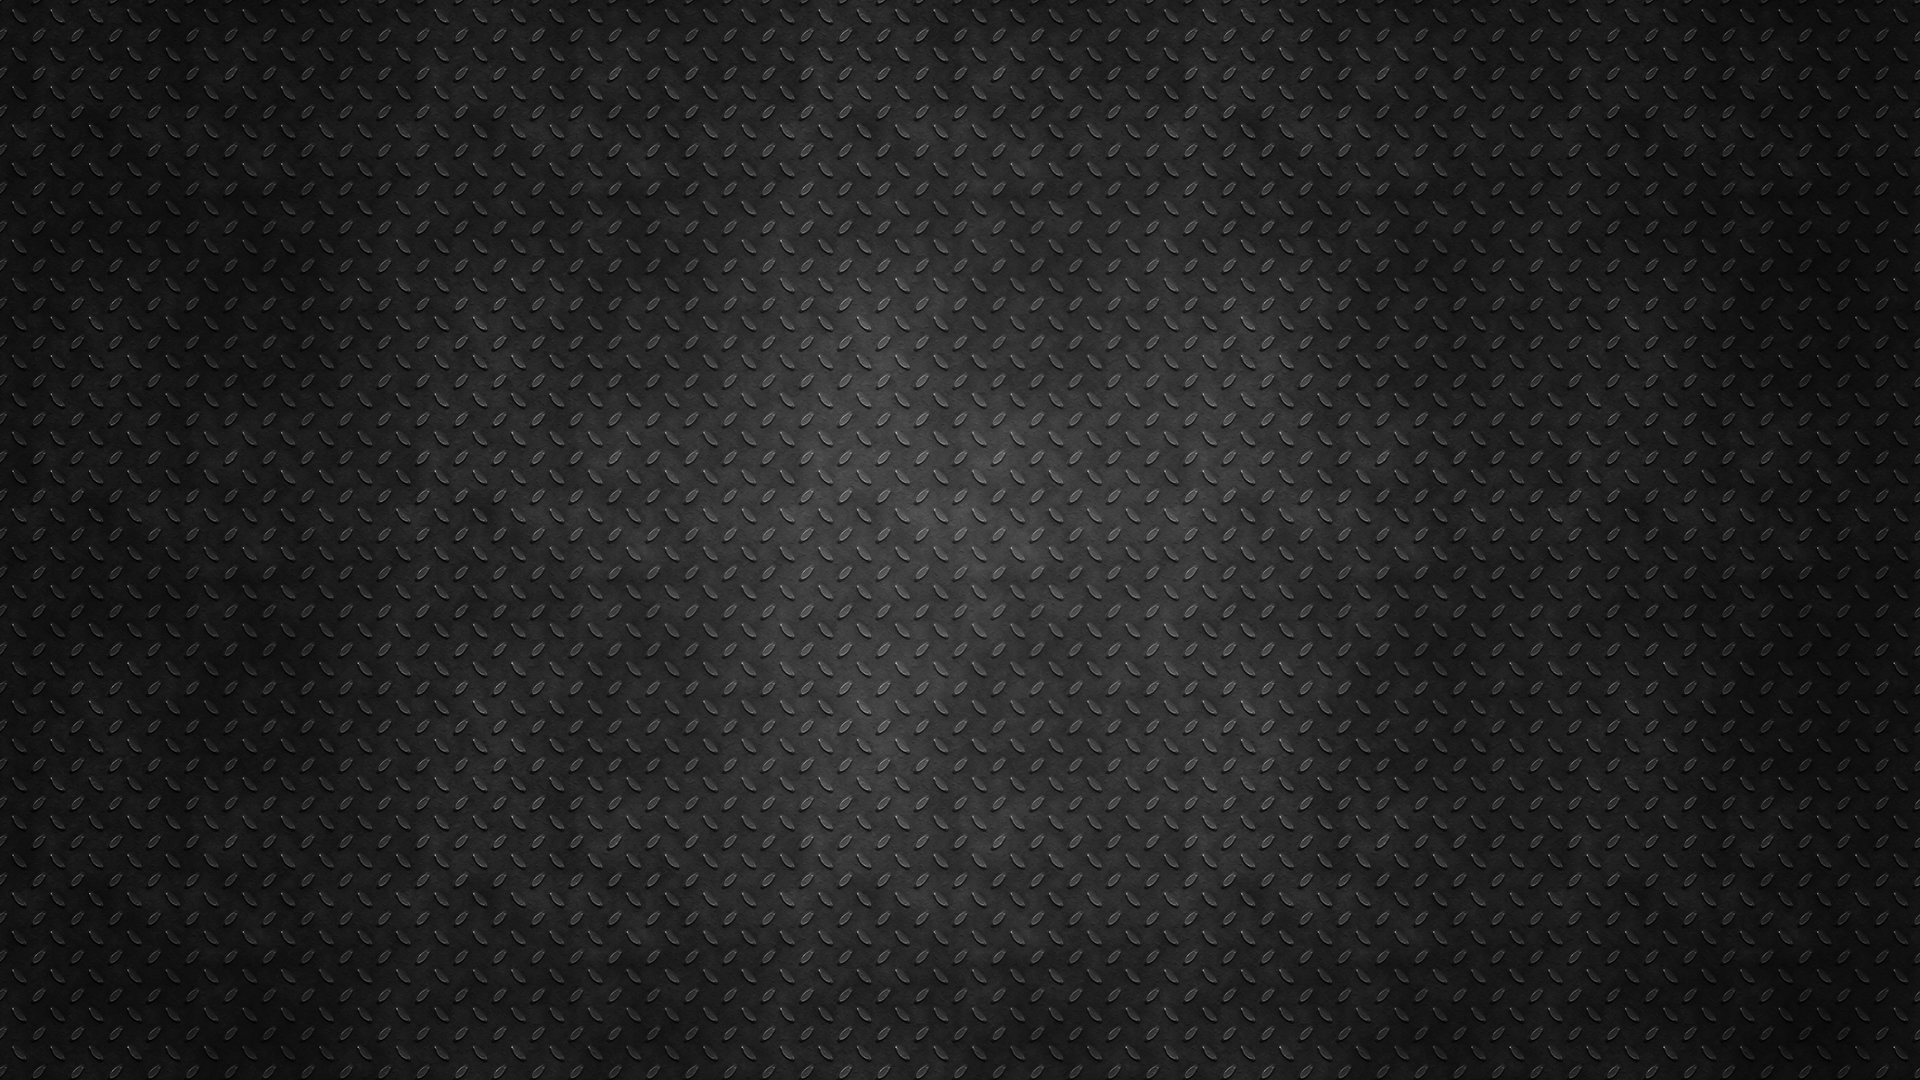 black background metal texture 19201080 abstract hd | Artwork ...